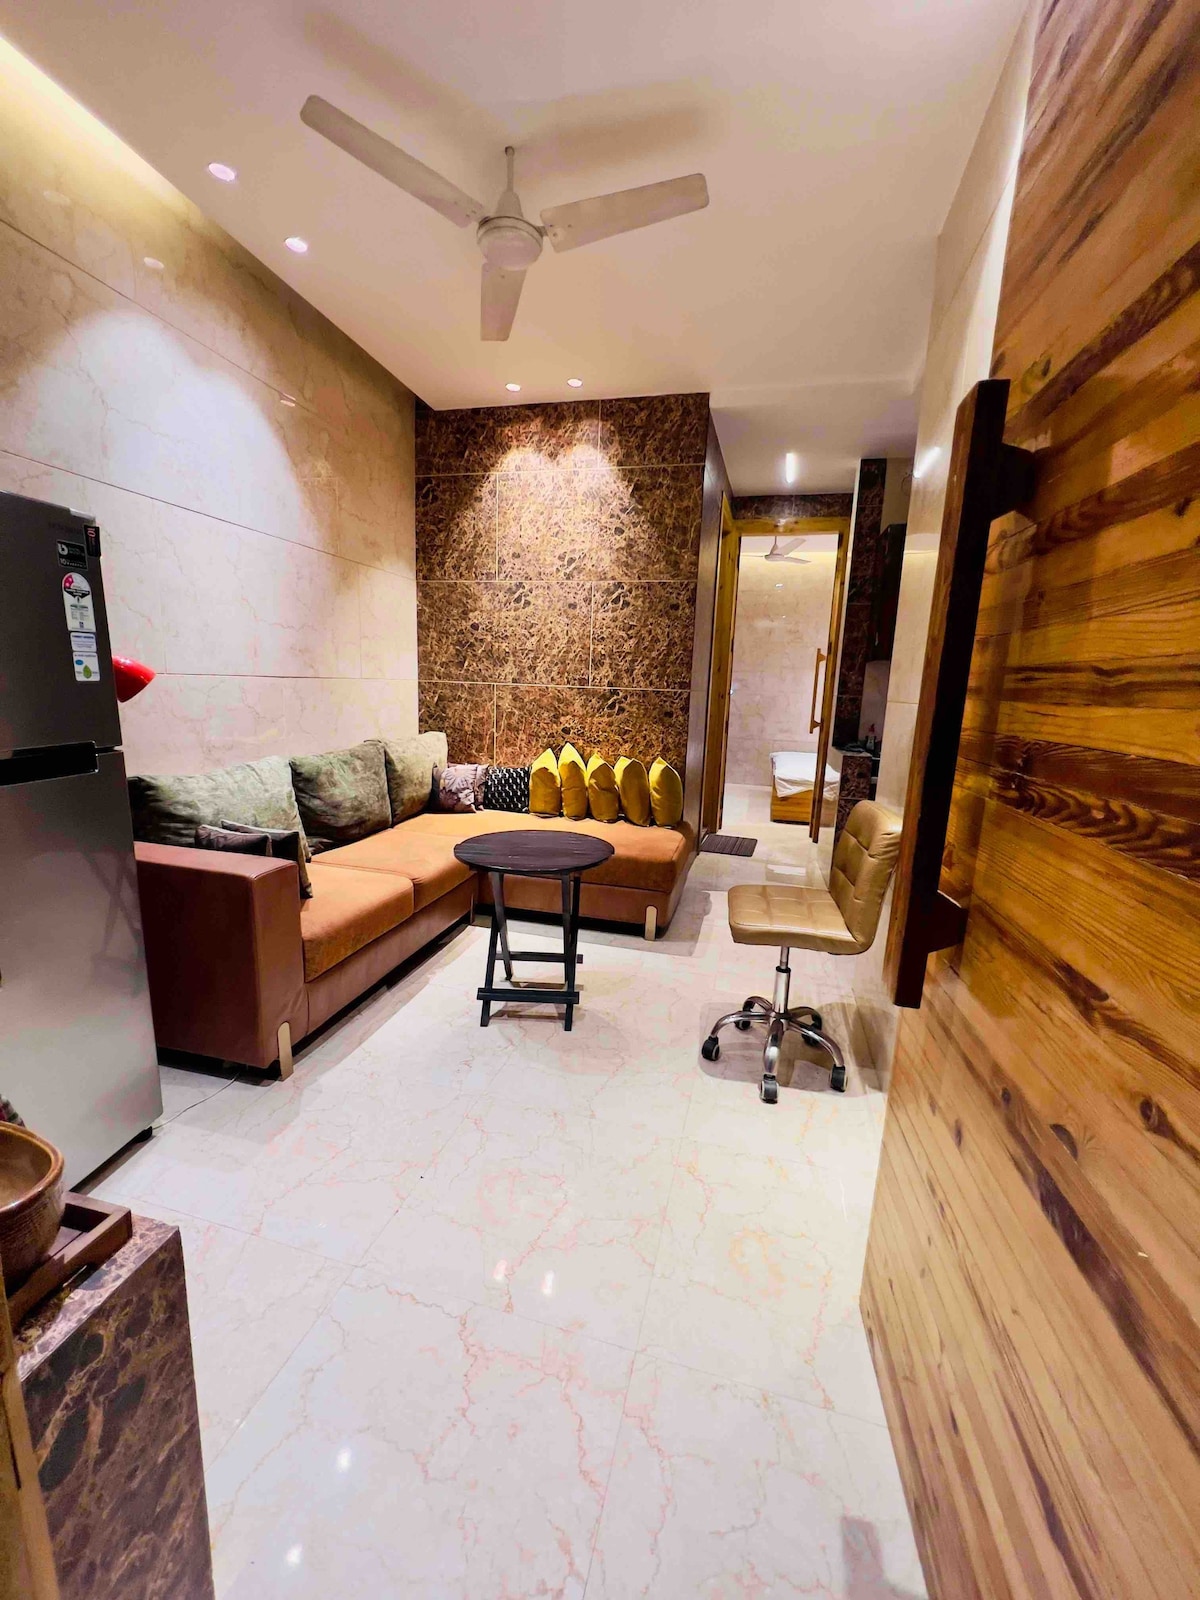 #Private 1 Bedroom Apartment with Balcony NewDelhi